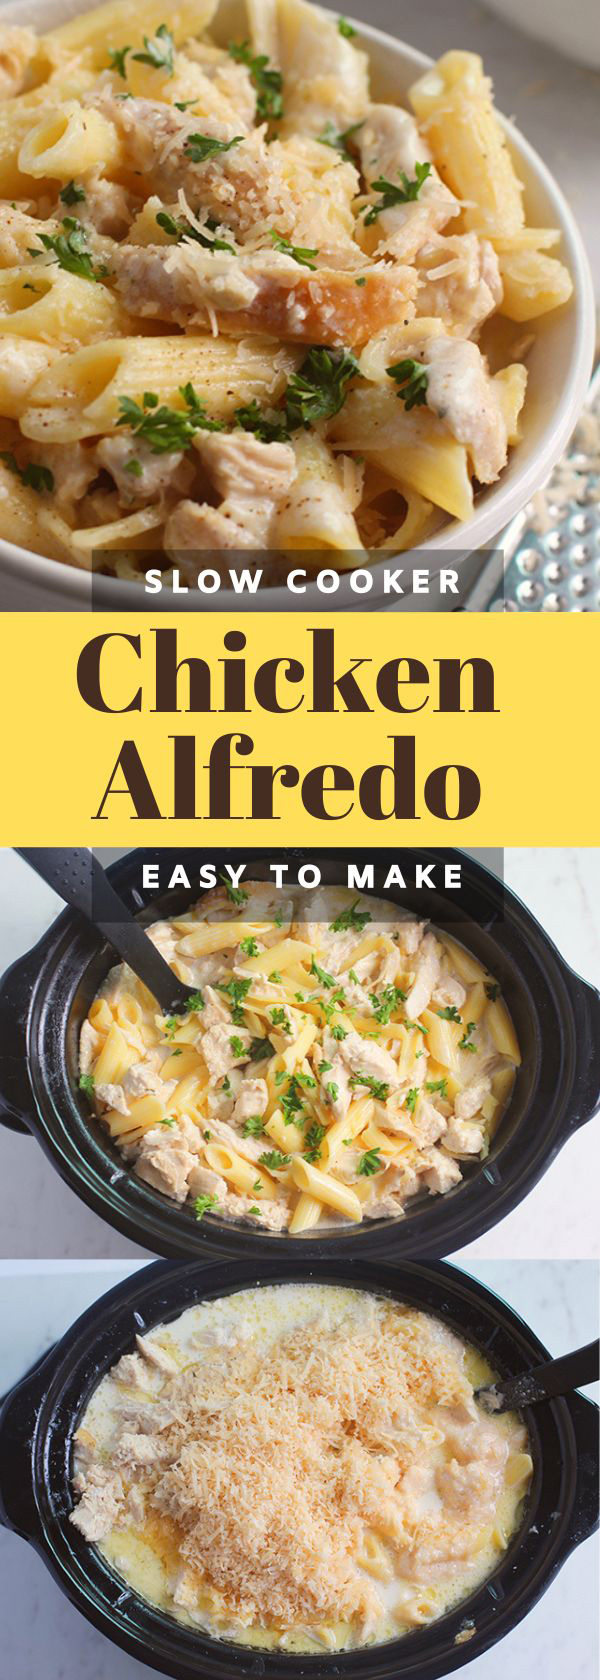 how to make chicken alfredo in the slow cooker fountainof30